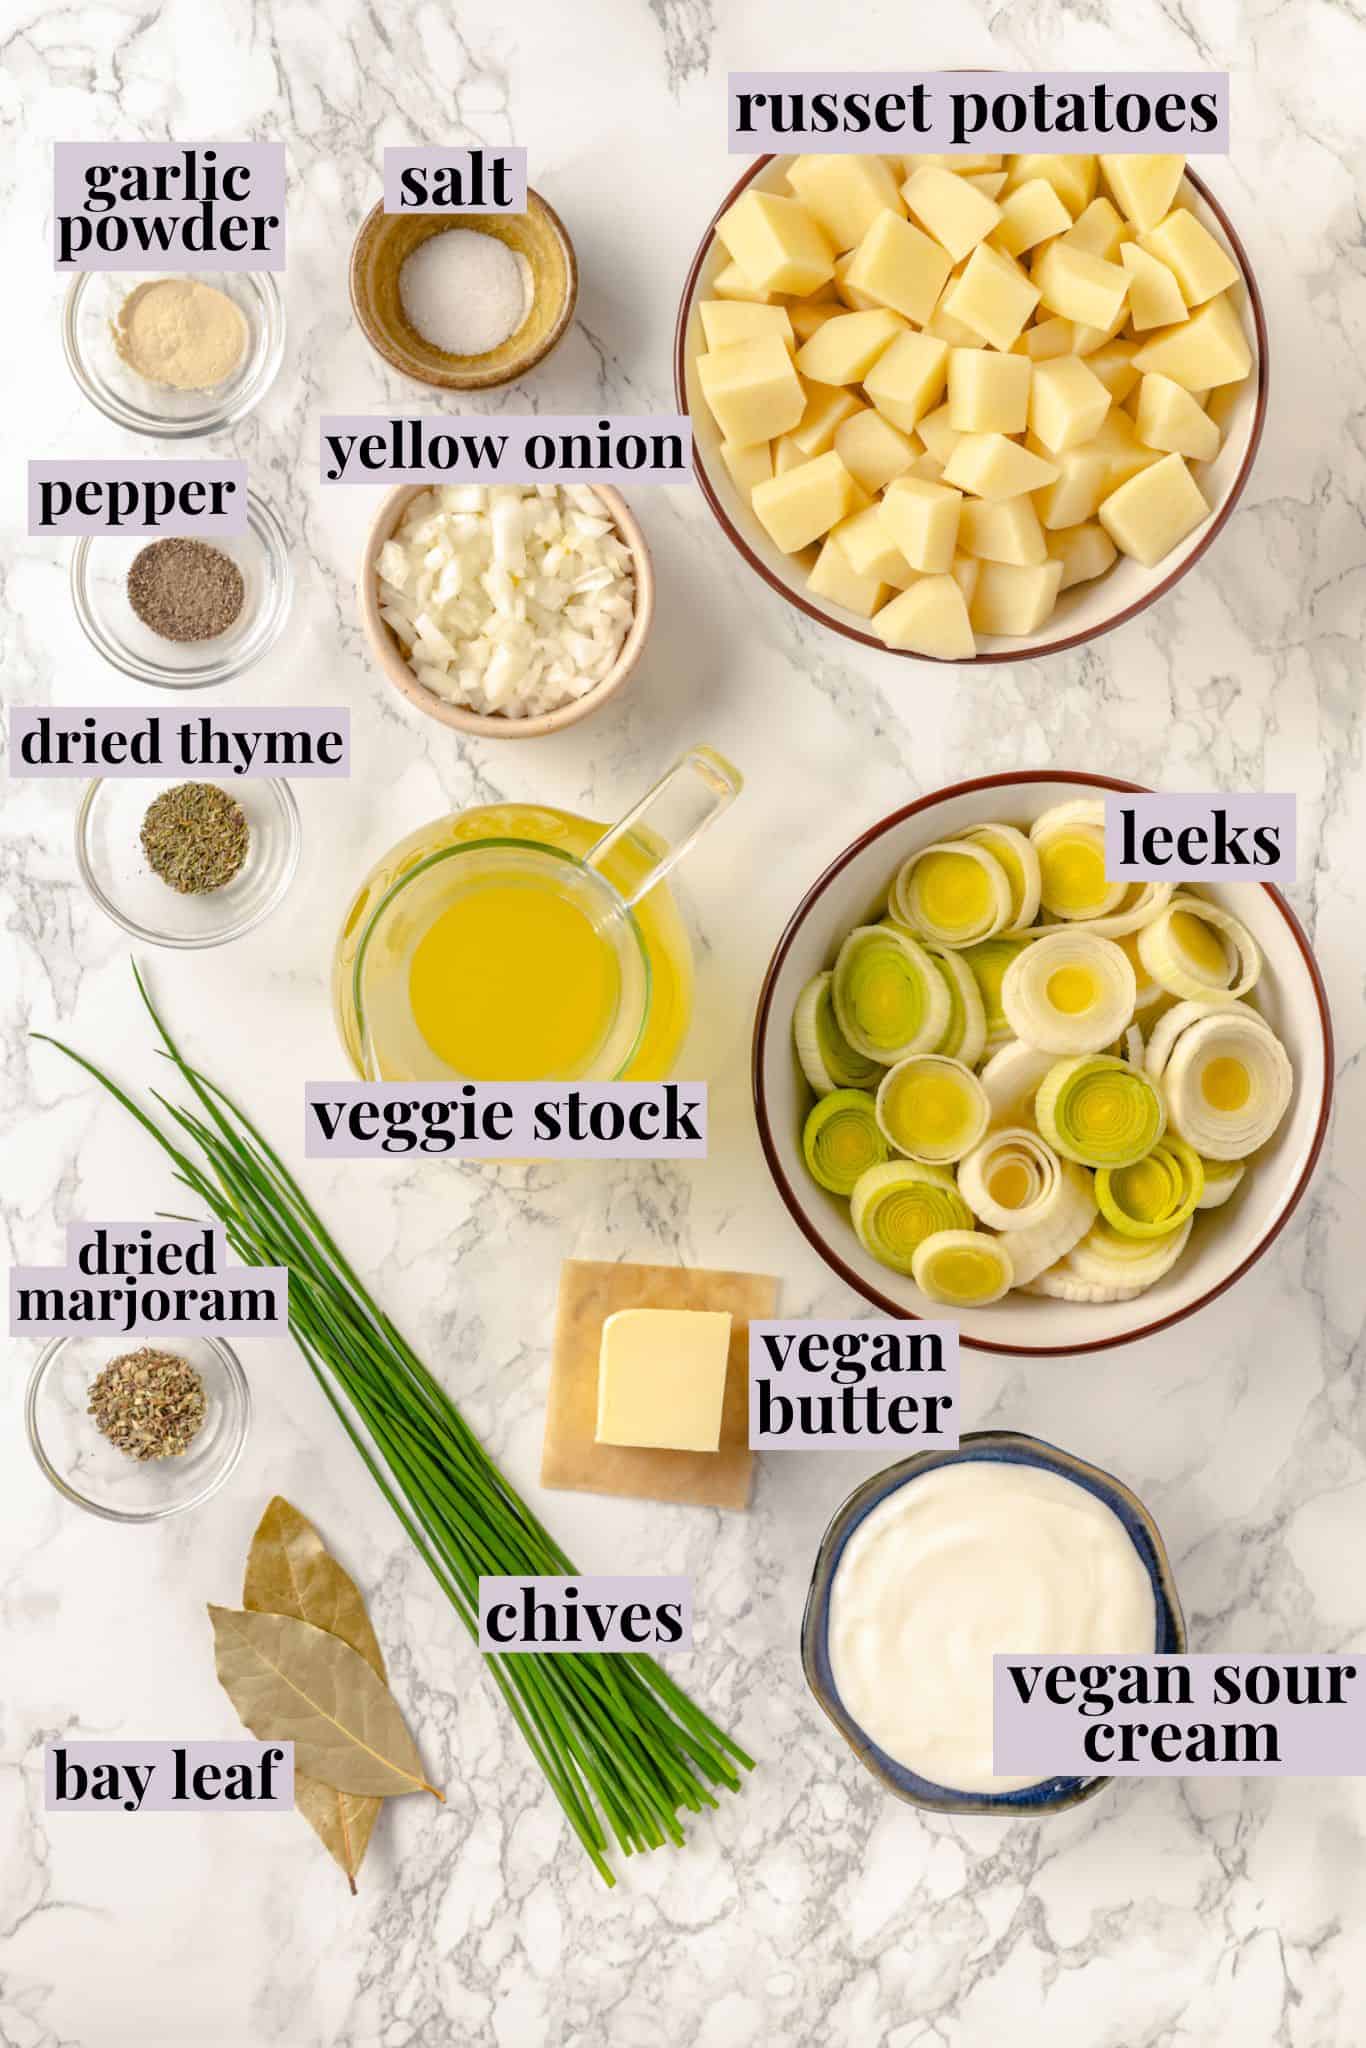 Overhead view of ingredients for vichyssoise with labels